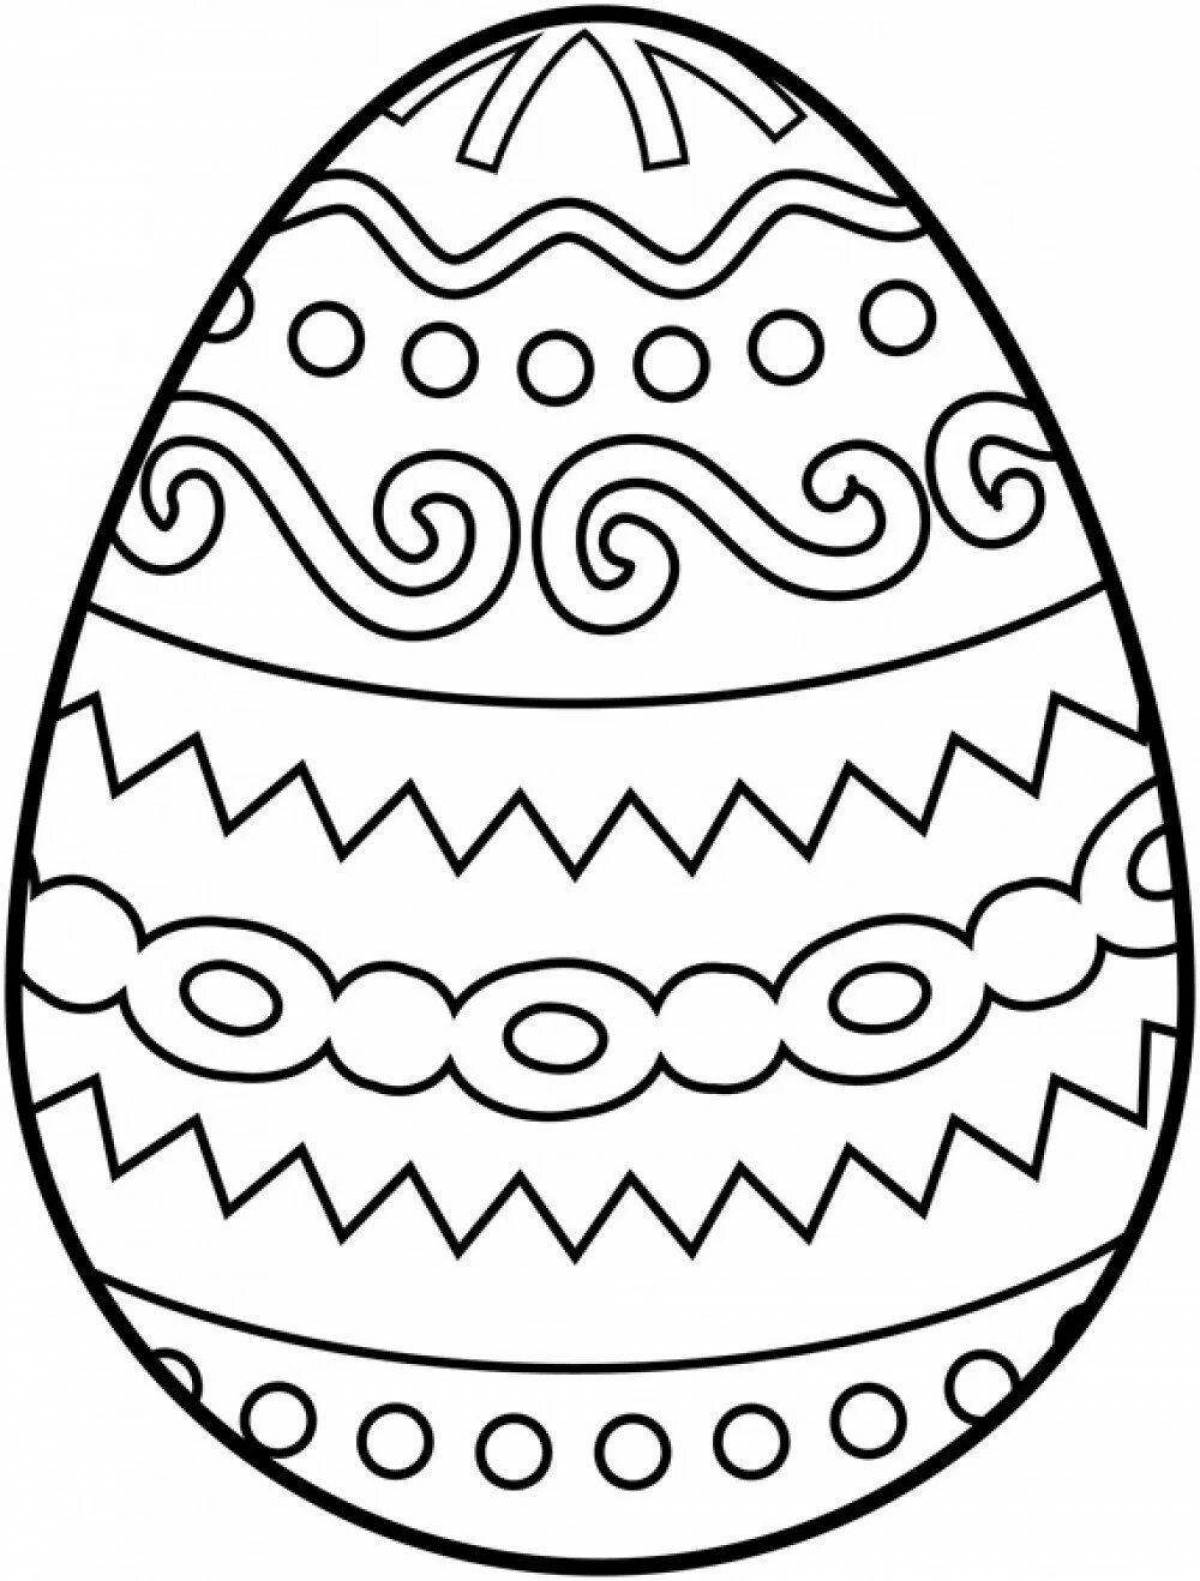 Glowing Easter egg coloring page